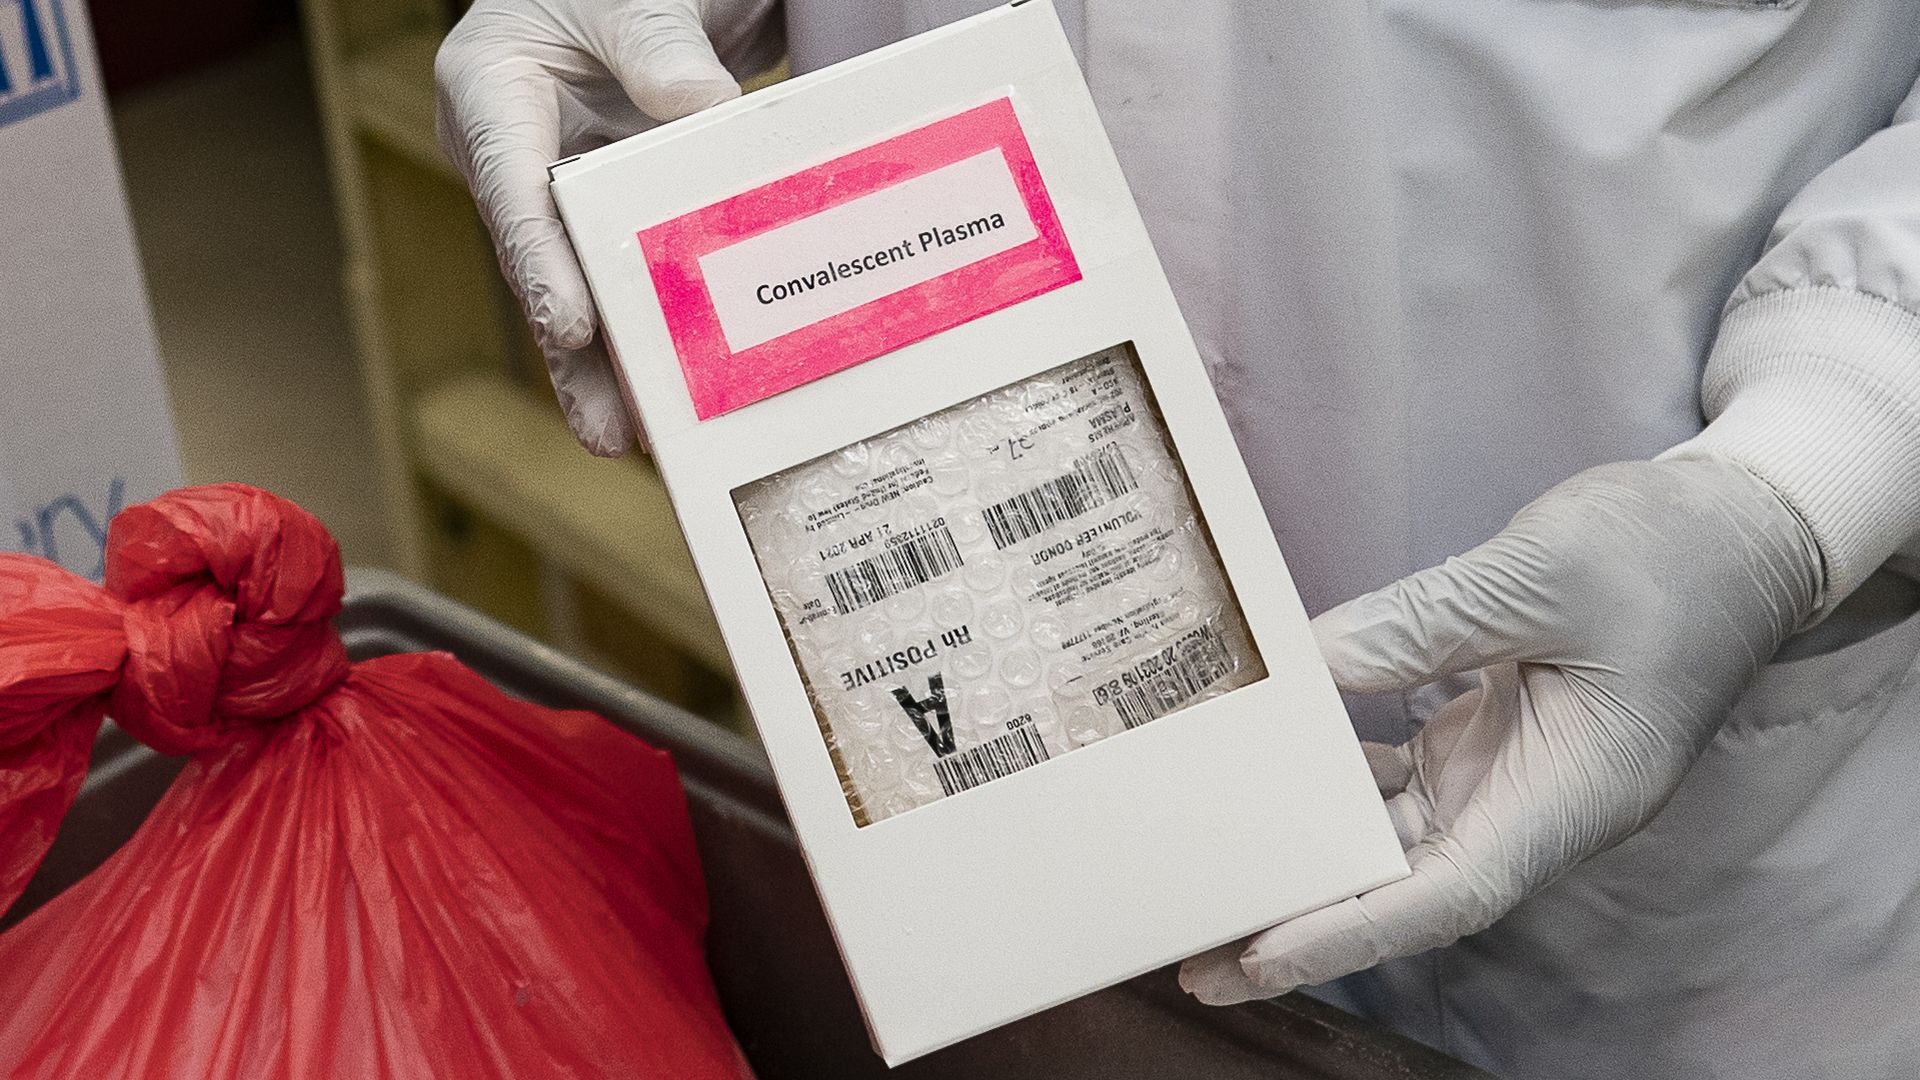 A lab technician freeze packs donated convalescent plasma donated by recovered COVID-19 patients.